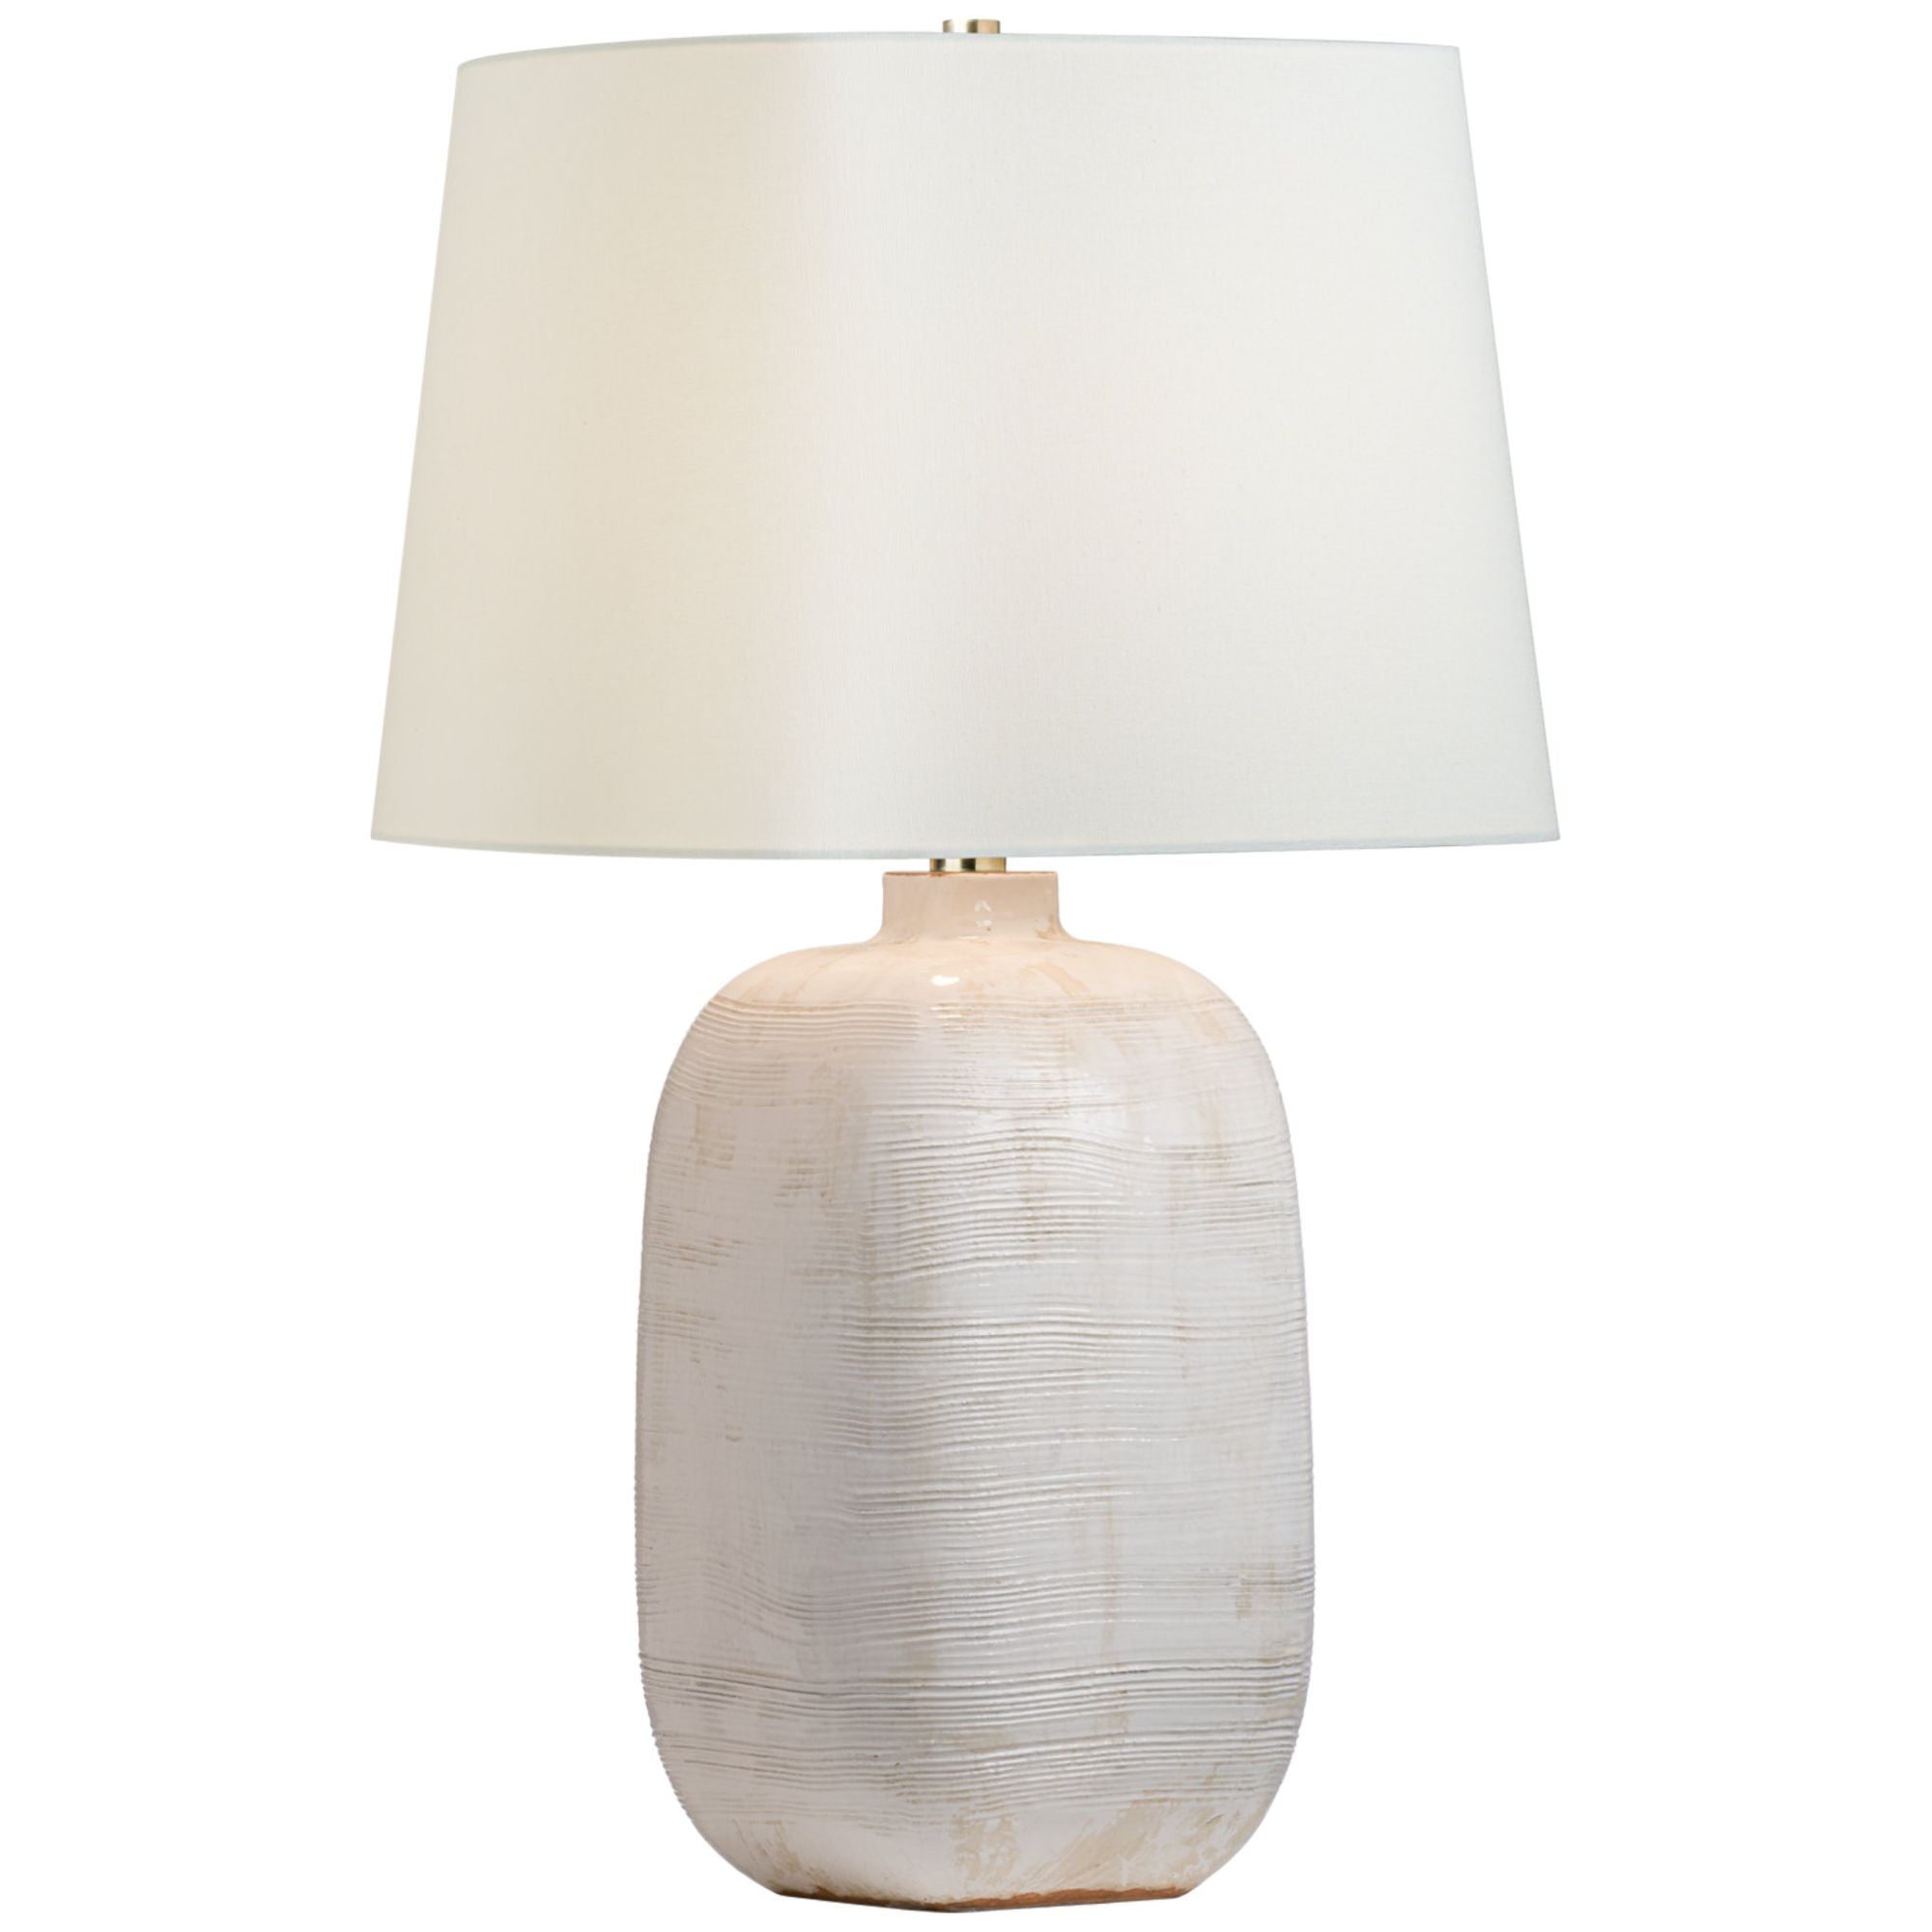 Chapman & Myers Pemba Large Combed Table Lamp in Glossy White Crackle with Linen Shade